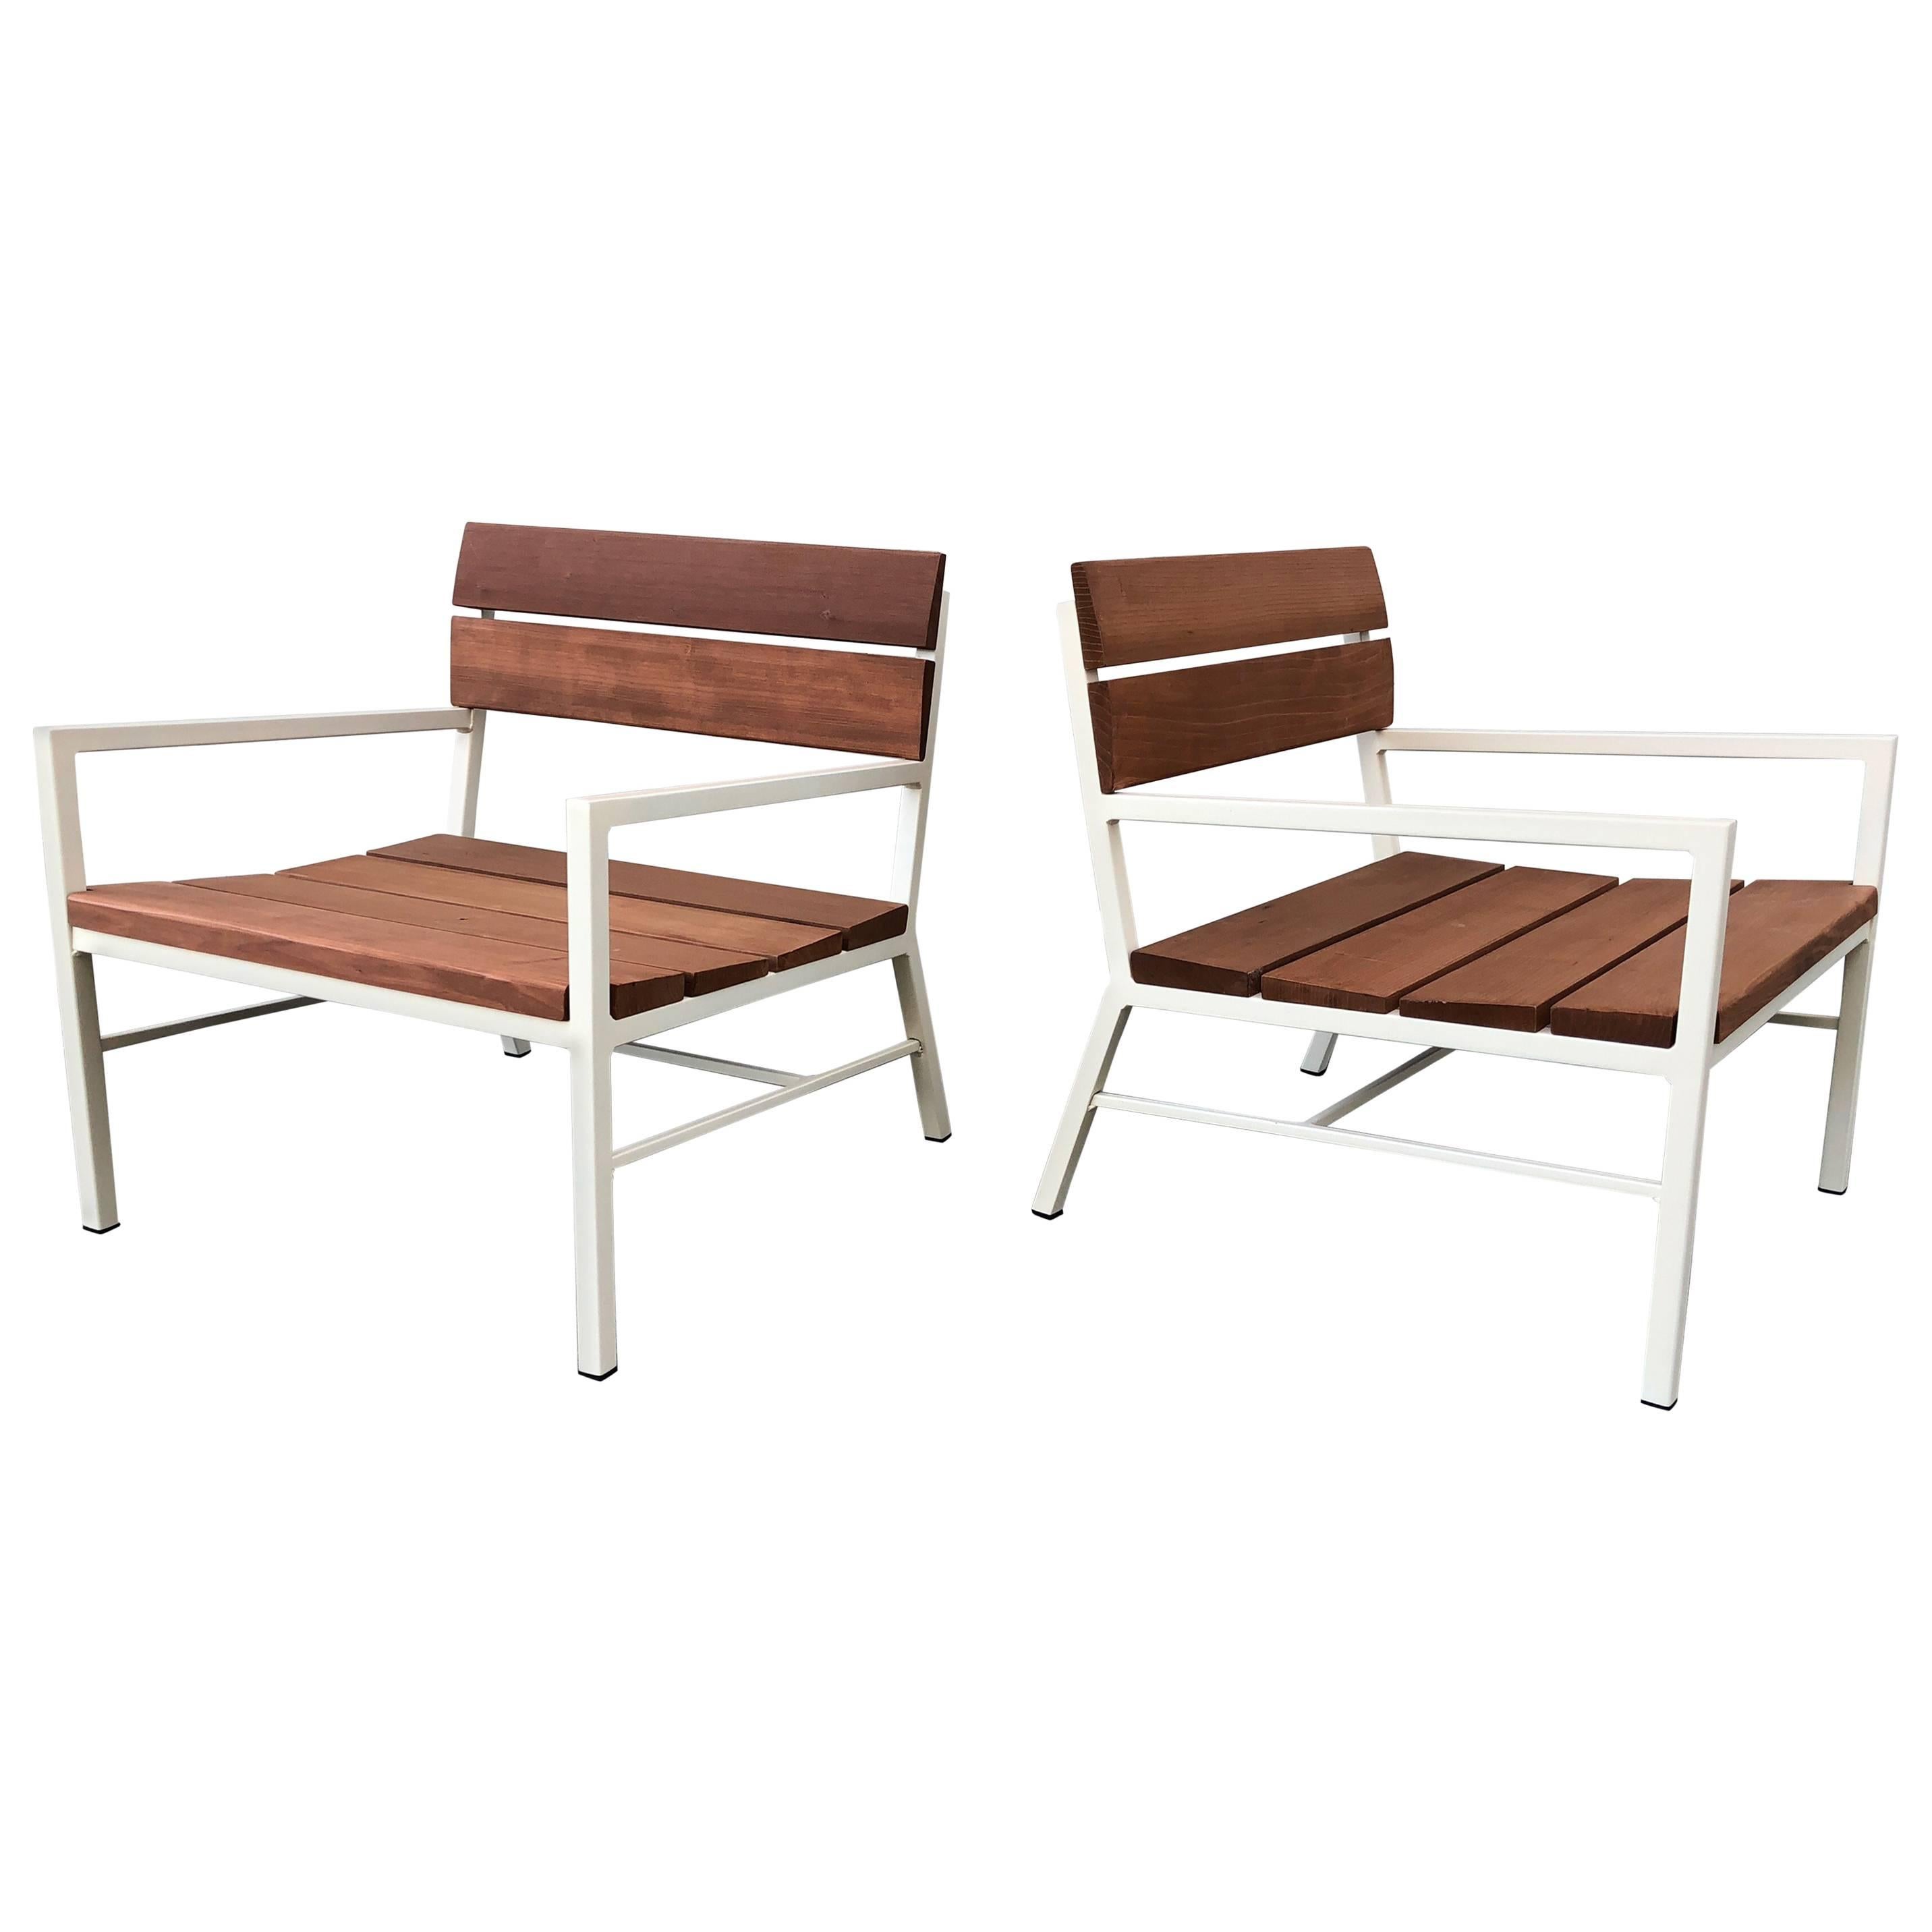 Van Keppel and Green Redwood Lounge Chairs, circa 1960s, California For Sale